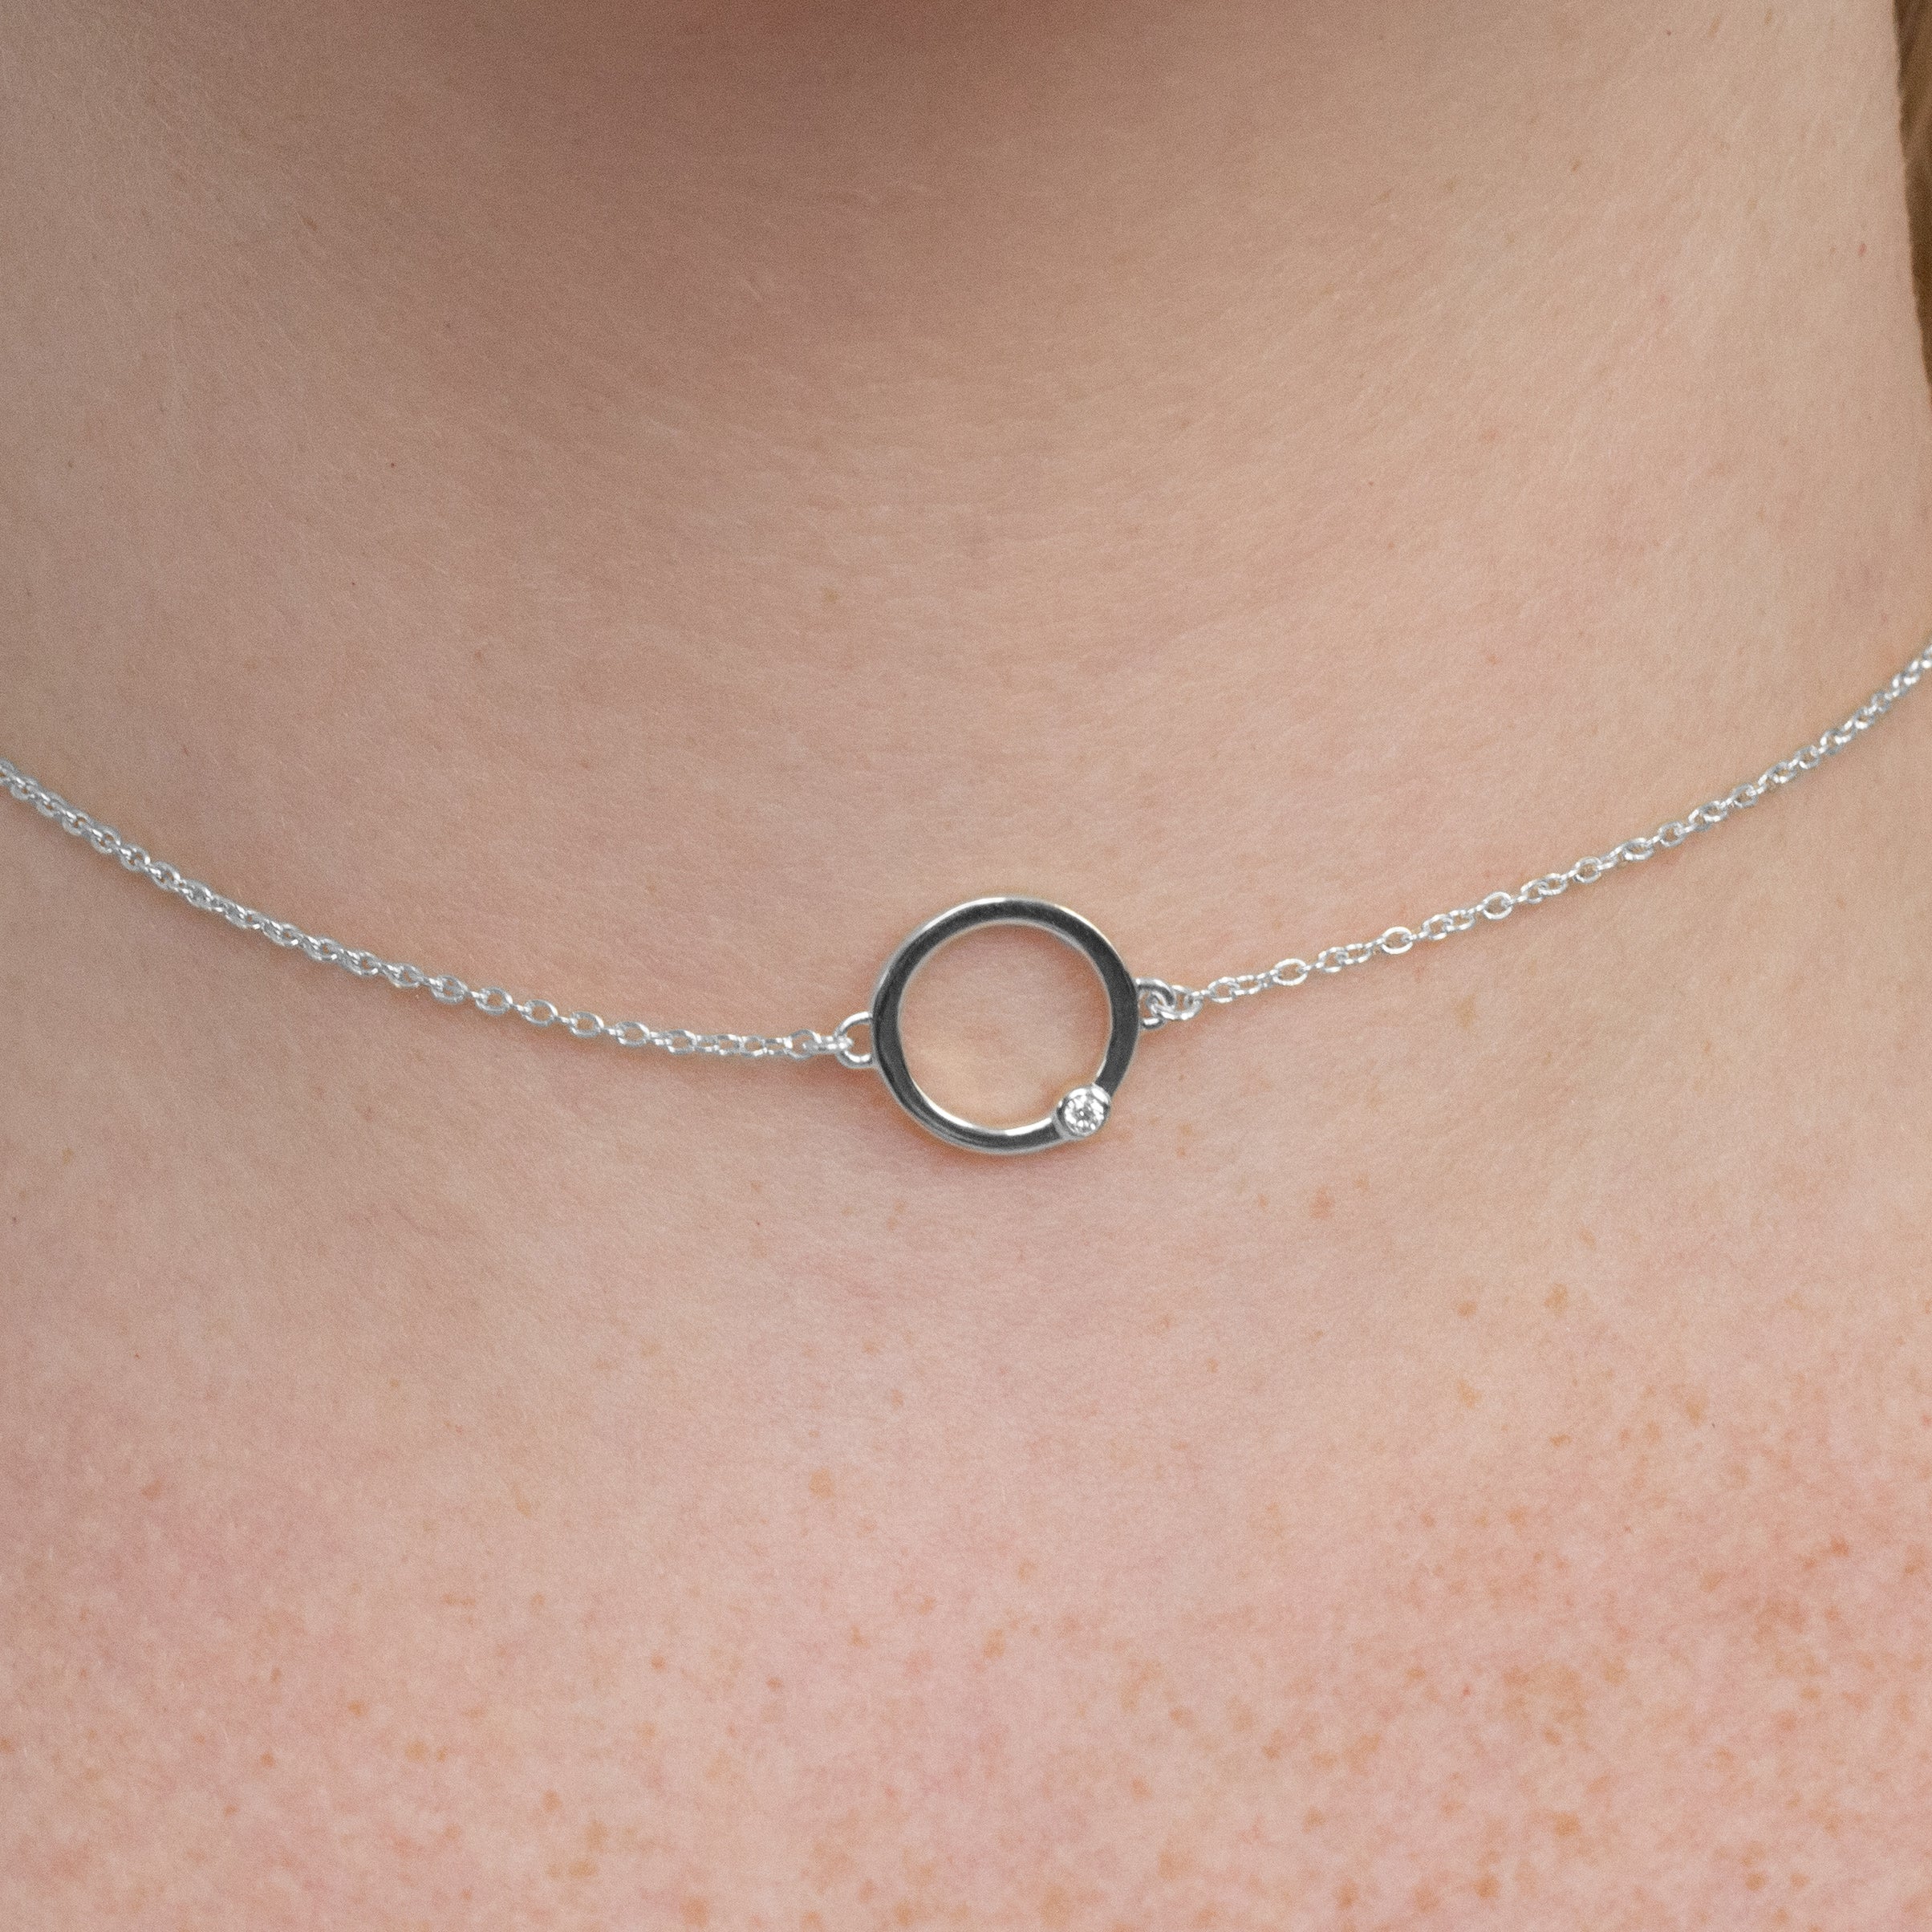 Look your best with this Cyclical Choker Necklace with Lab Grown Diamond. The necklace features a simple, elegant design with a lab-grown diamond for a touch of luxury. 